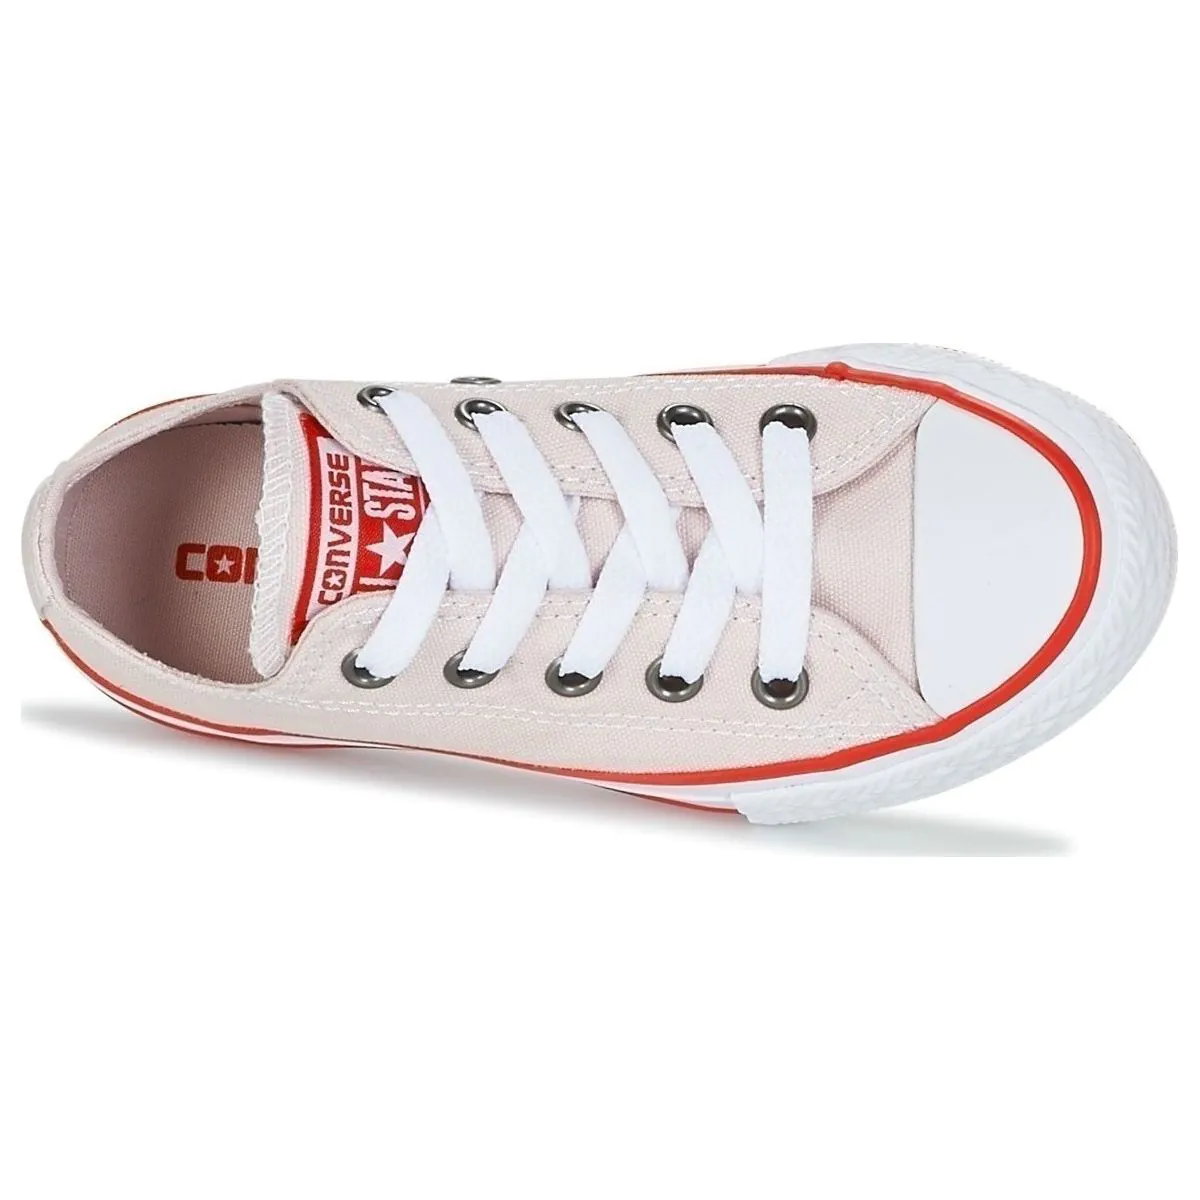 Converse All Star Chuck Tailor Low Top junior Shoes 660102C